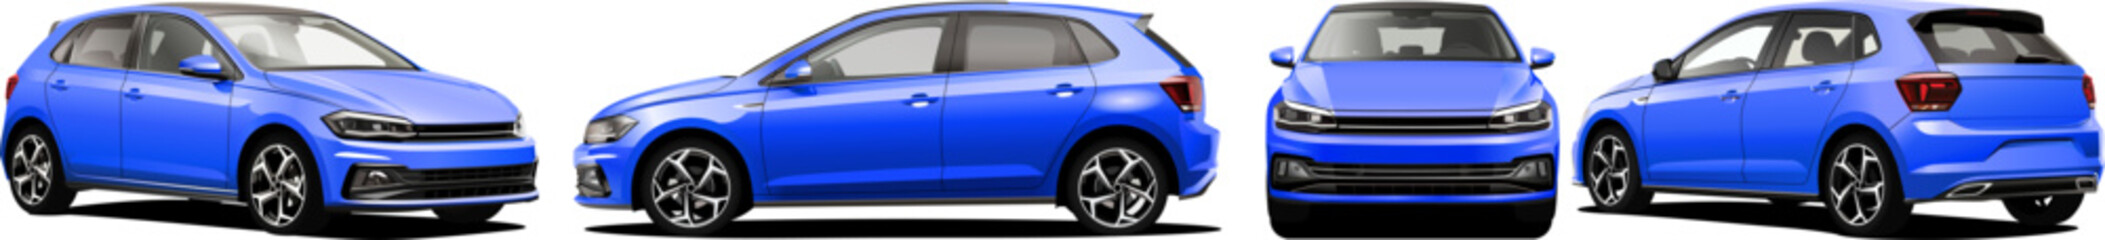 realistic vector blue car with gradients using manual tracing tool 